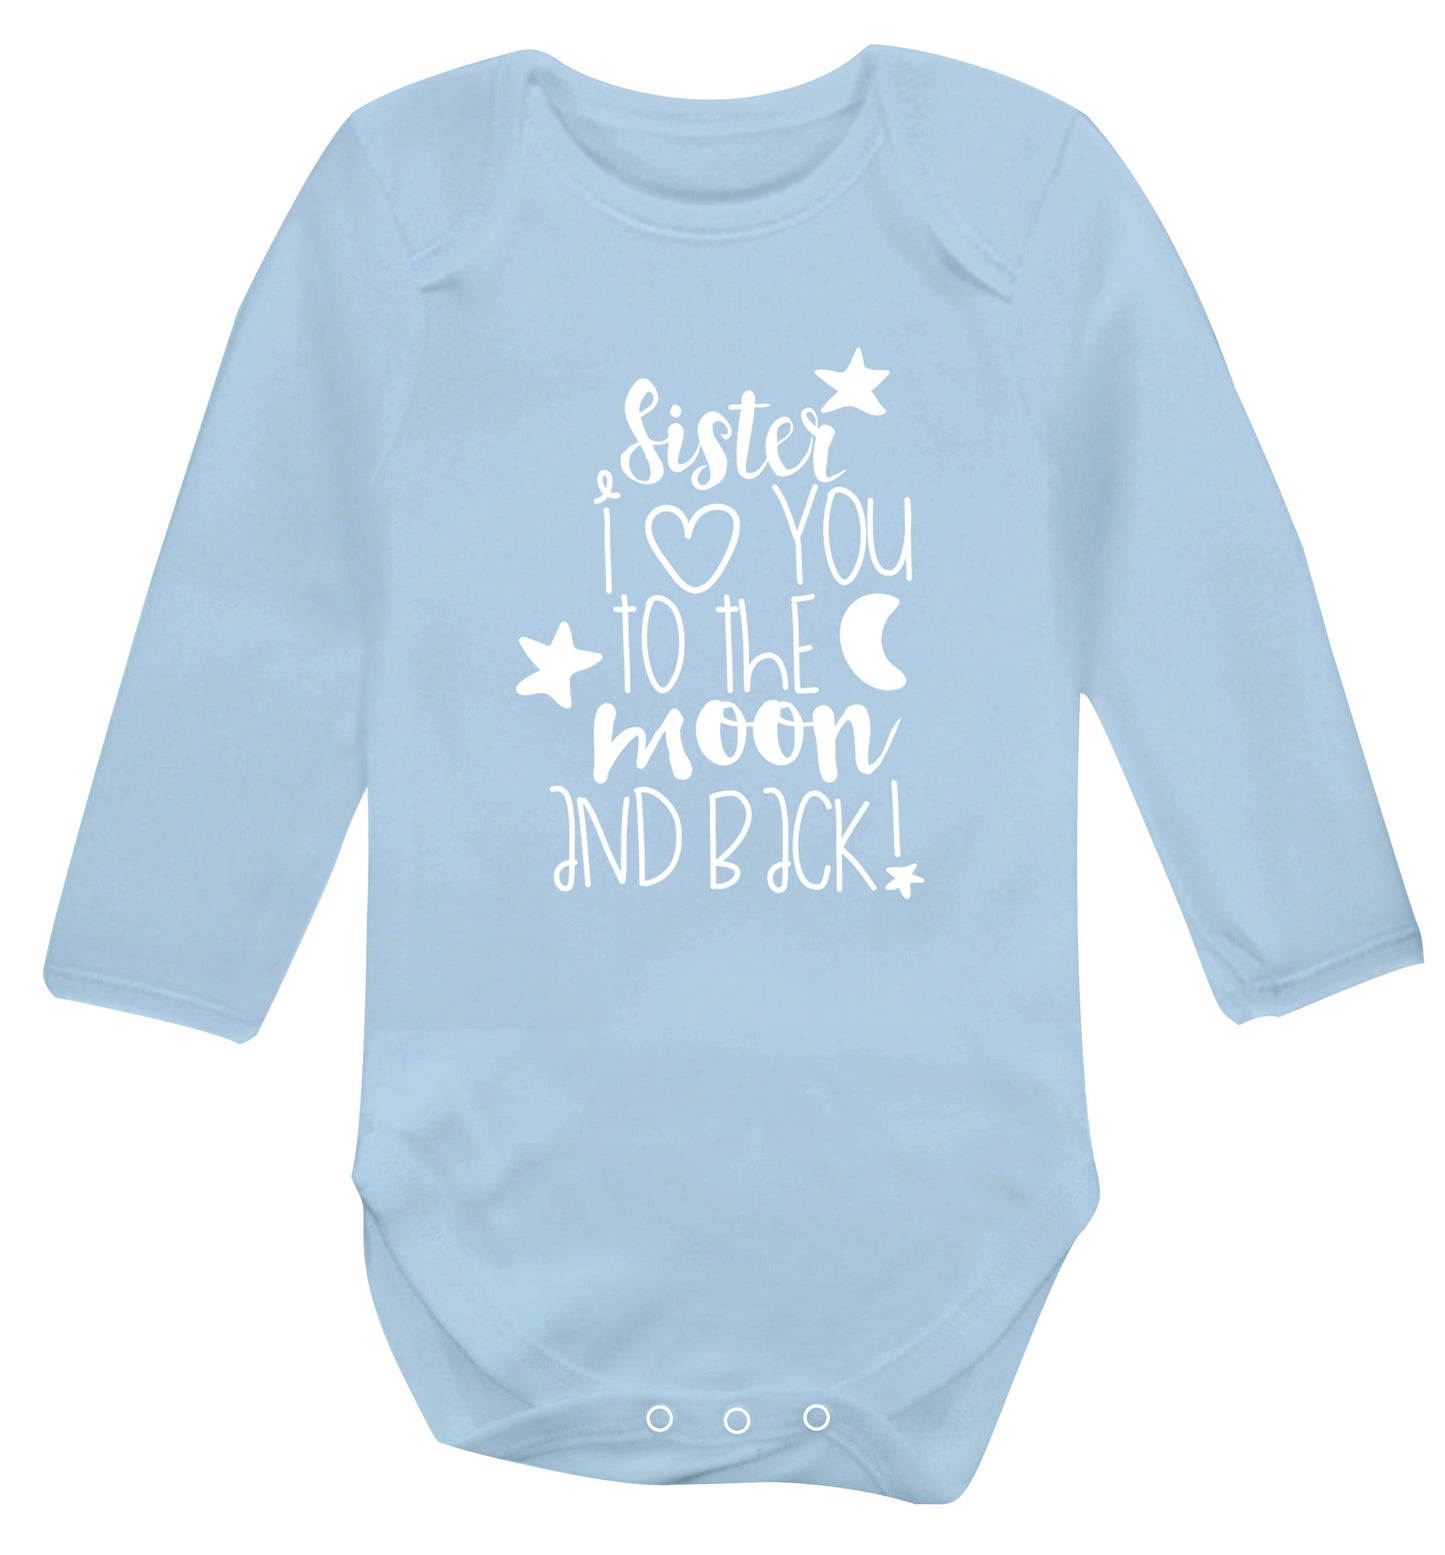 Sister I love you to the moon and back Baby Vest long sleeved pale blue 6-12 months